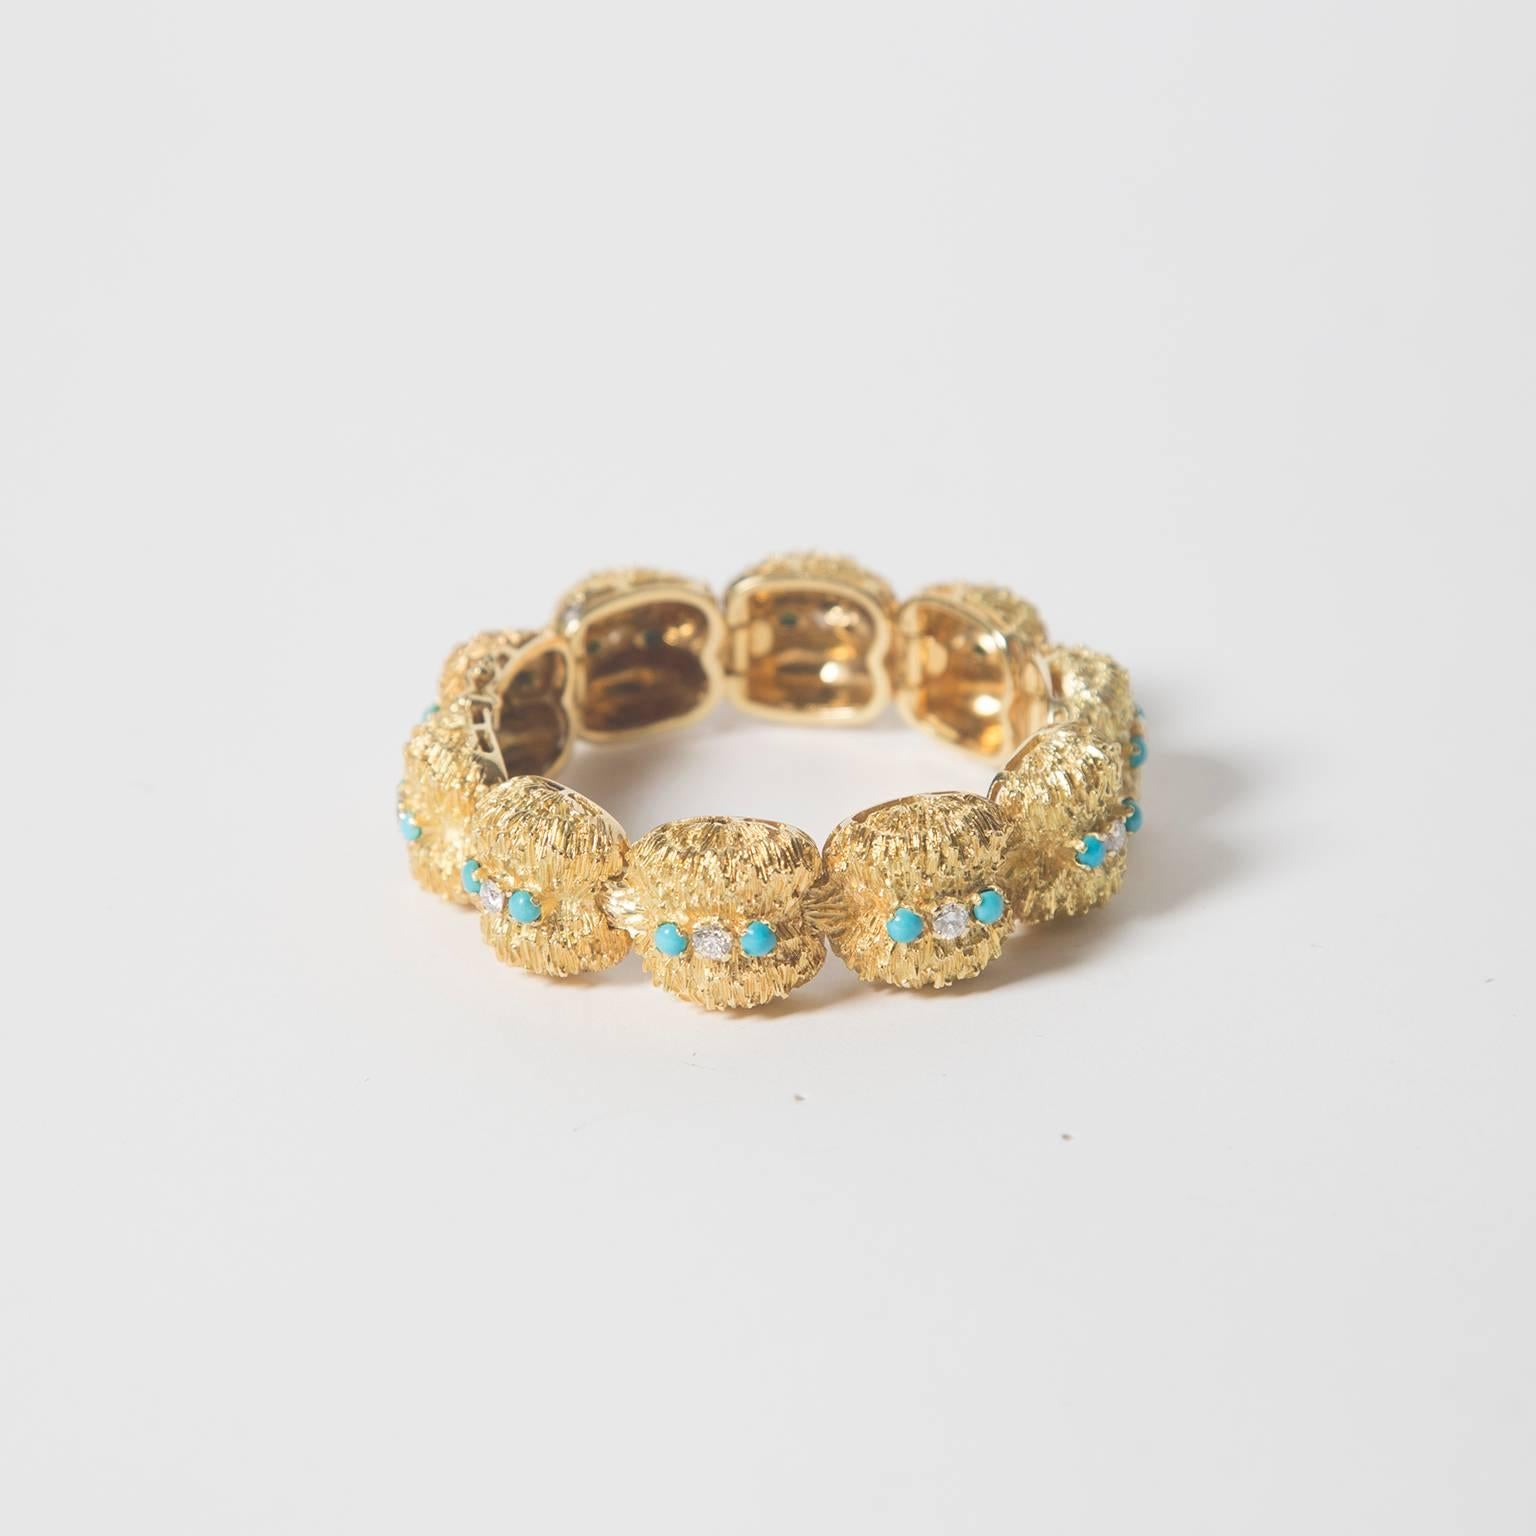 Heavy yet flexible brushed 18K gold bracelet, set with natural turquoise and diamonds. 